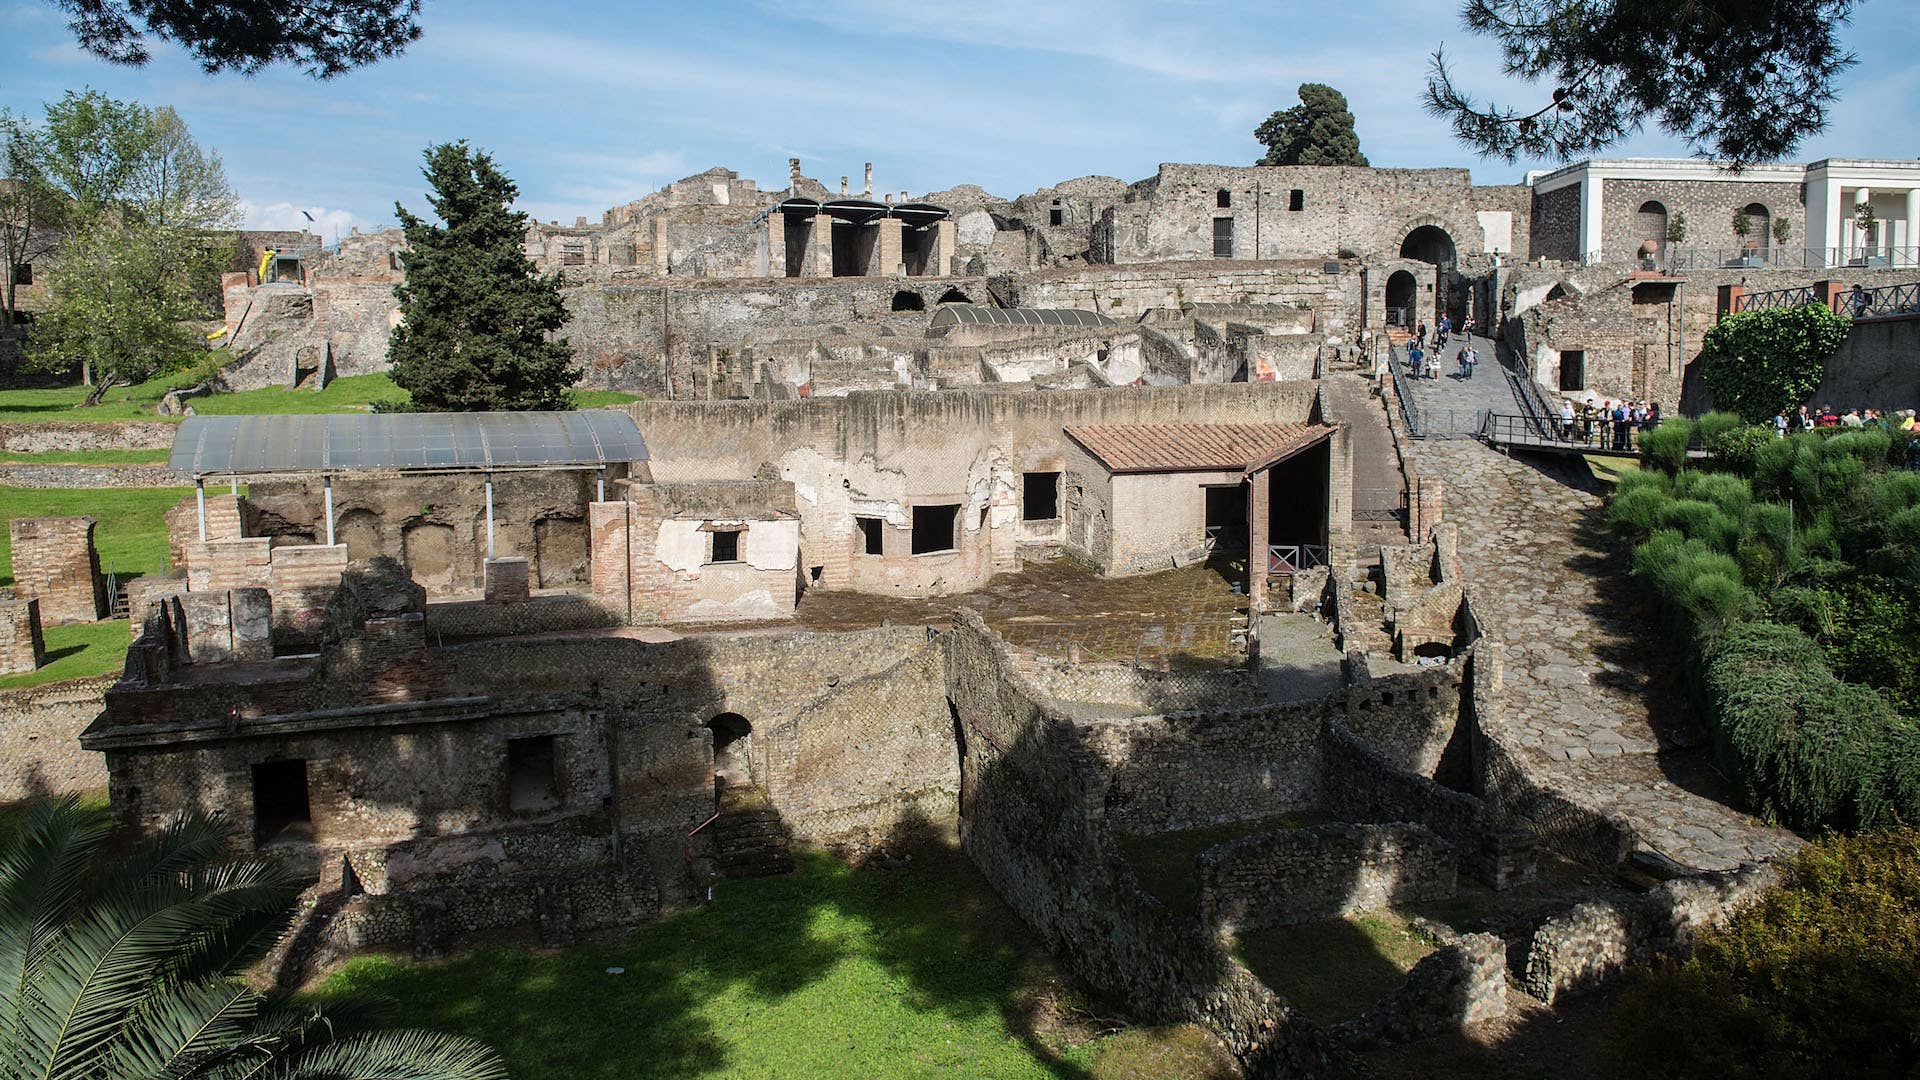 General view of the archaeological site on April 12, 2014 in Pompei, Italy.